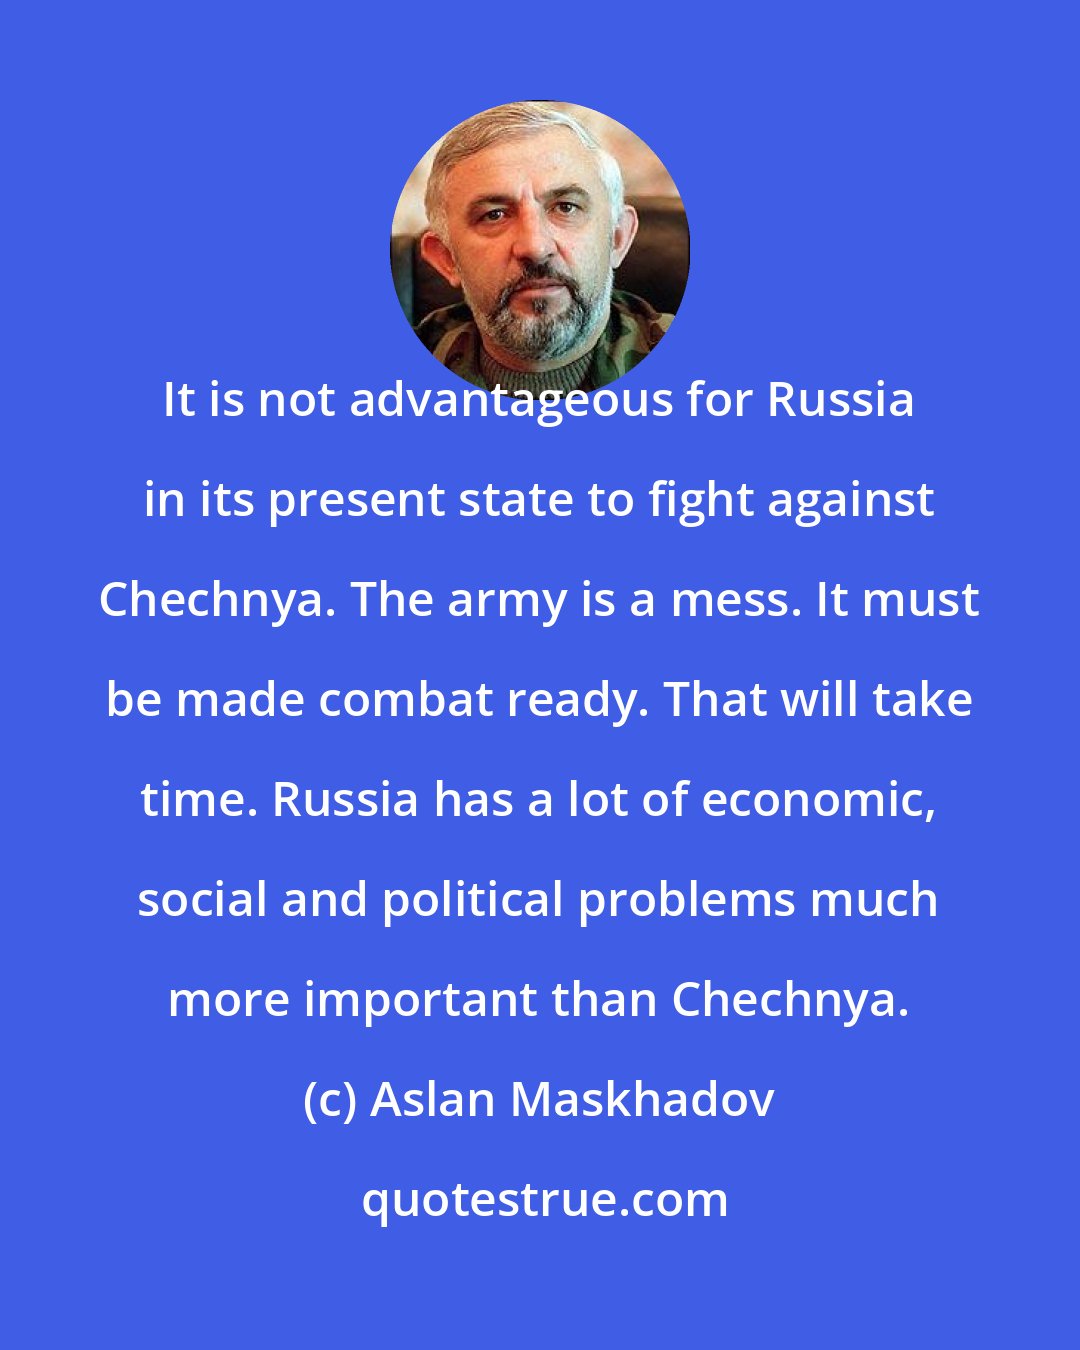 Aslan Maskhadov: It is not advantageous for Russia in its present state to fight against Chechnya. The army is a mess. It must be made combat ready. That will take time. Russia has a lot of economic, social and political problems much more important than Chechnya.